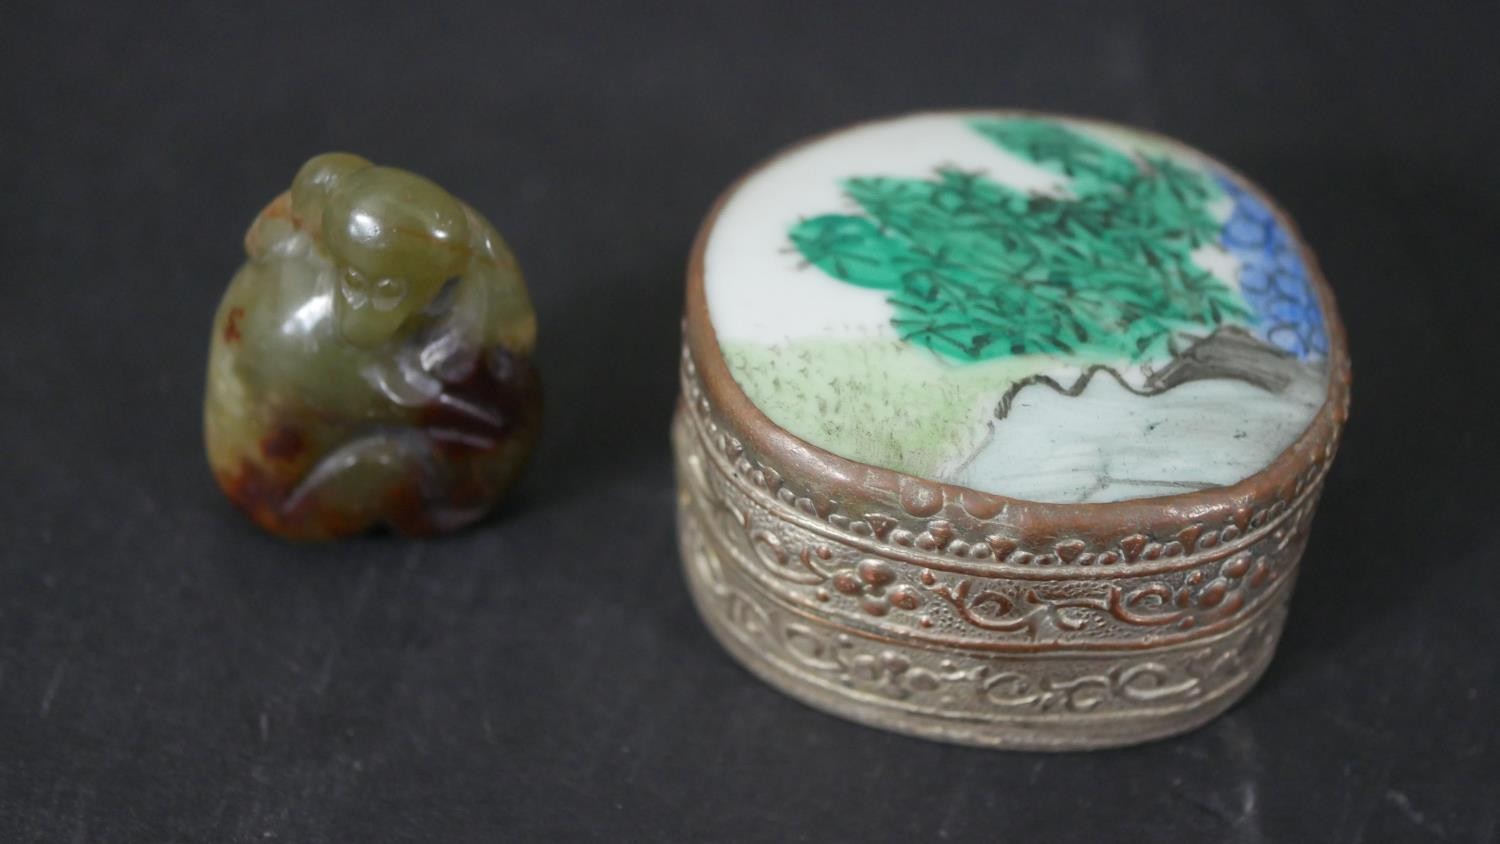 A Chinese carved jade monkey pendant along with a Chinese porcelain fragment and silver plated